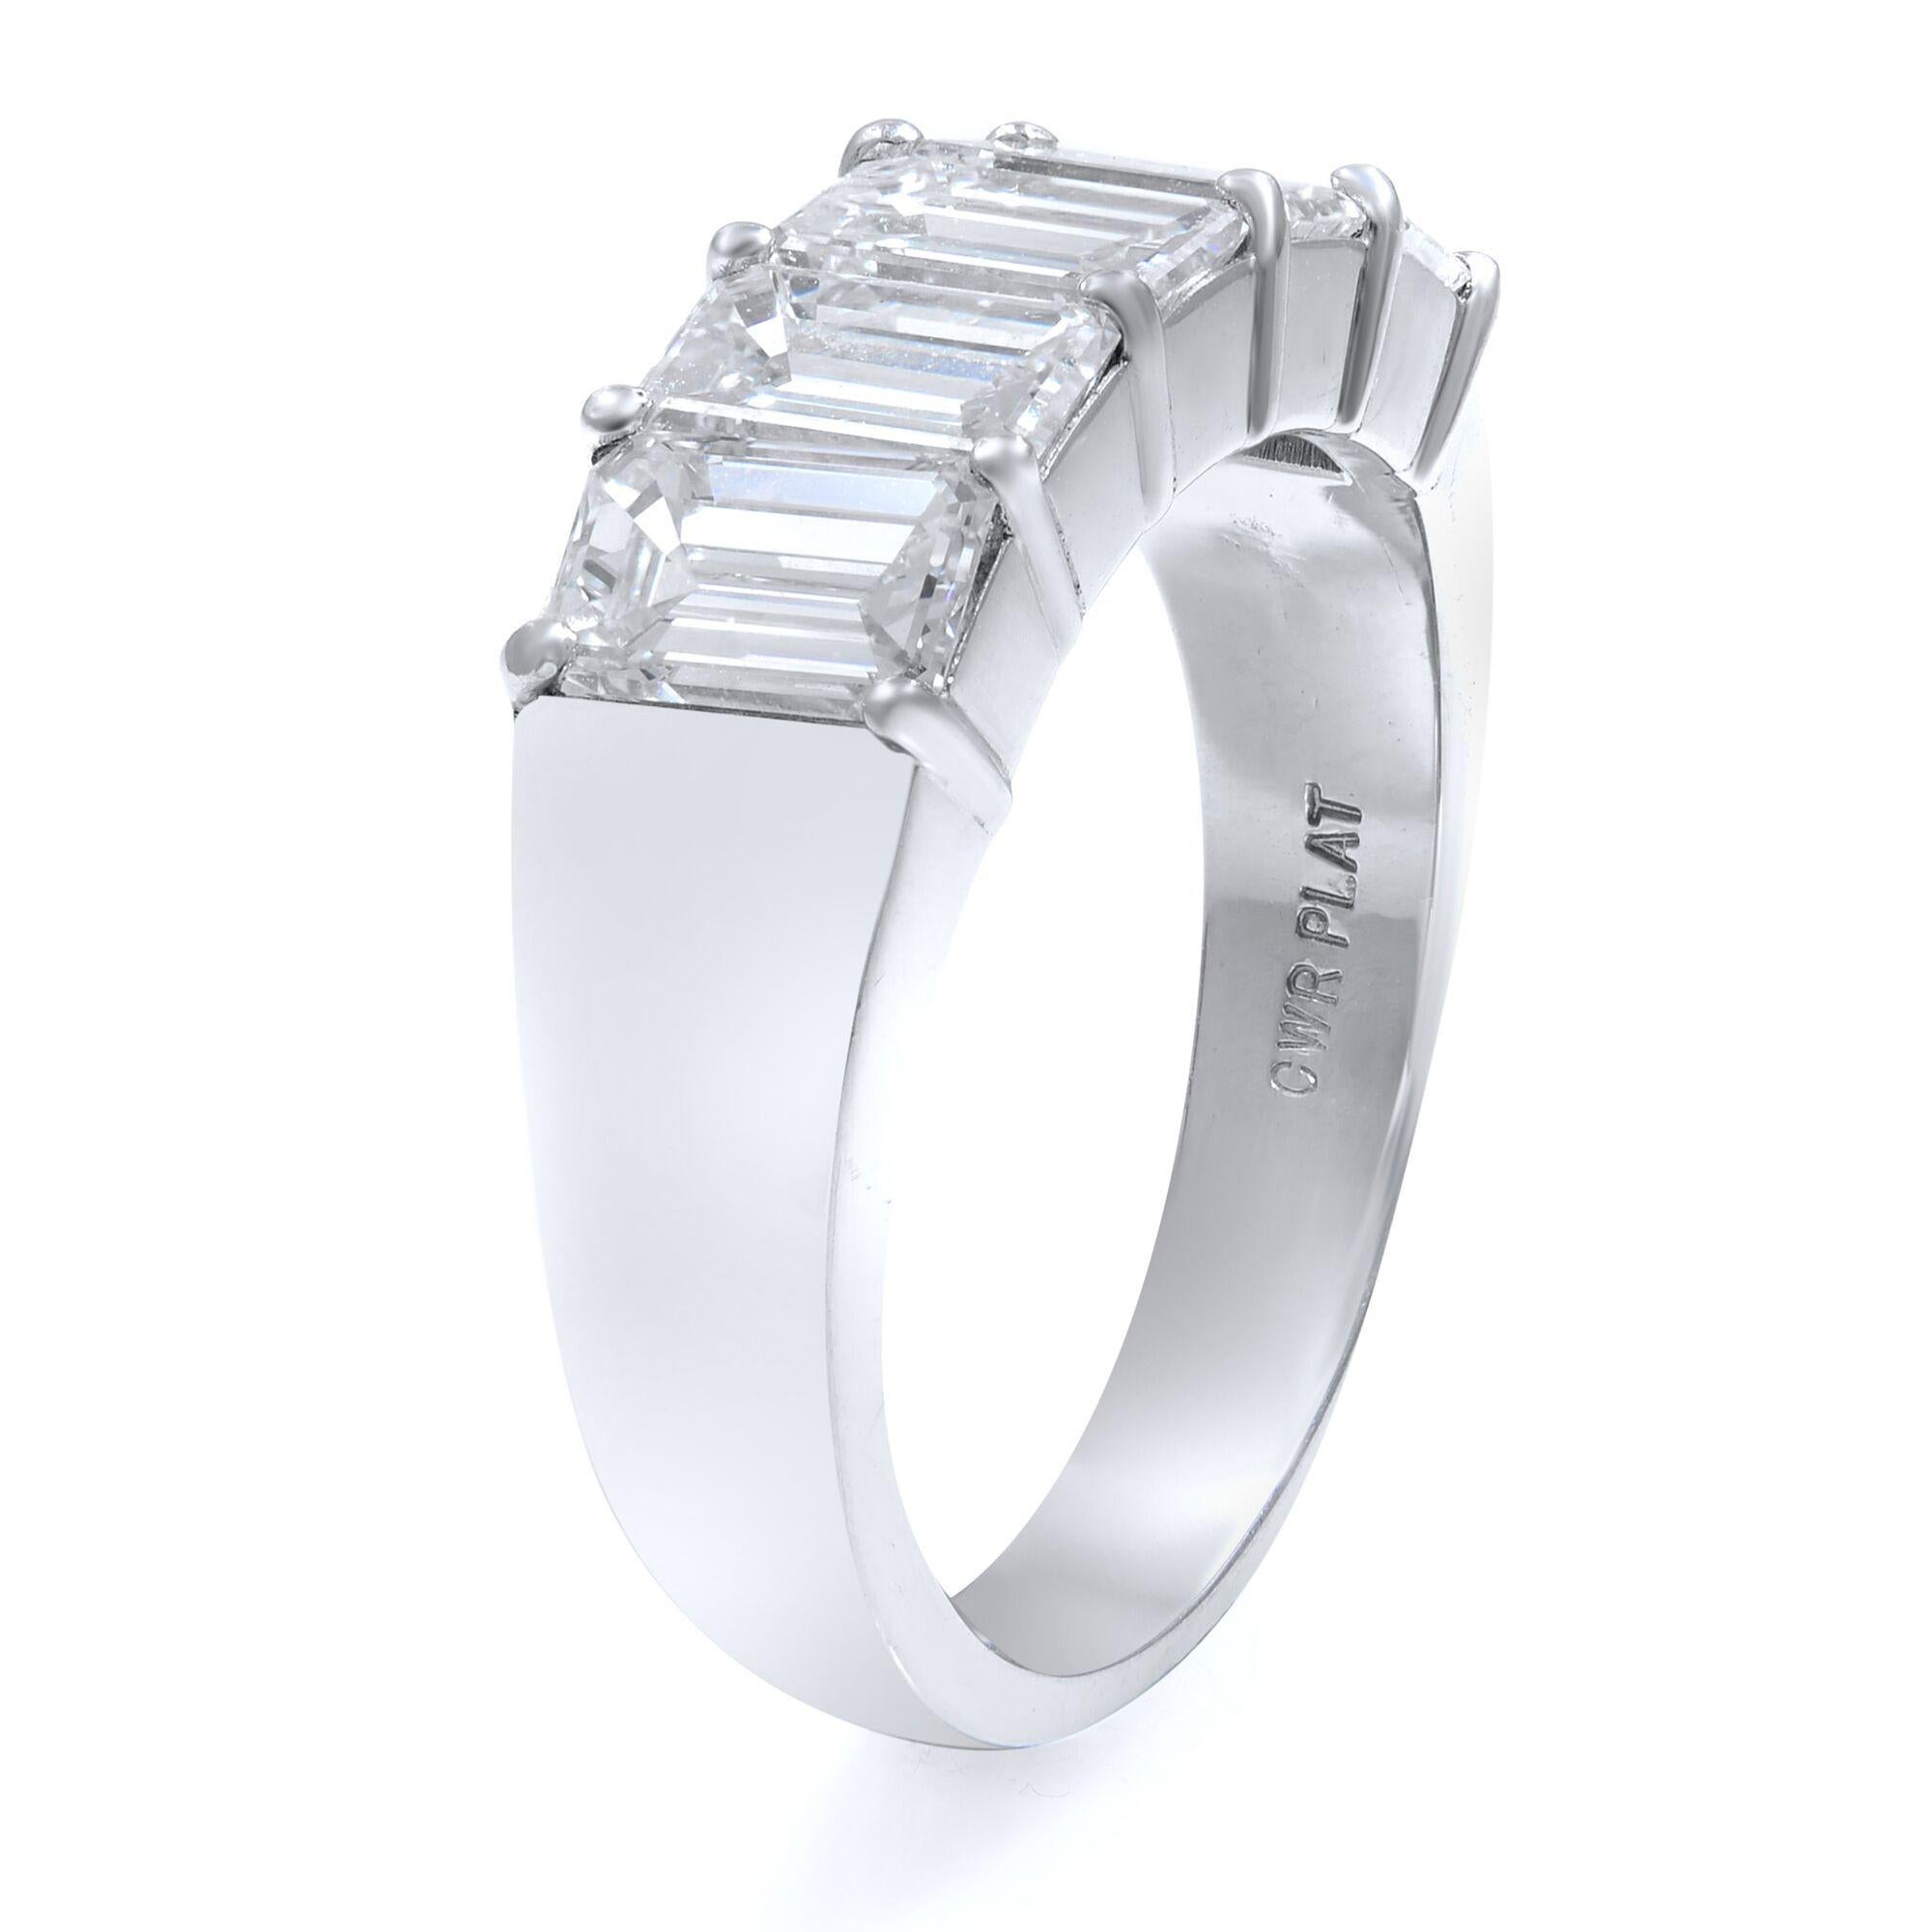 This classic ring features five beautifully matched emerald cut diamonds set in enduring platinum. Glistening with 2.57 carats of diamonds. Stone measurements are 6x8mm and weight of the whole piece is 5 grams. The clarity and color of the stones